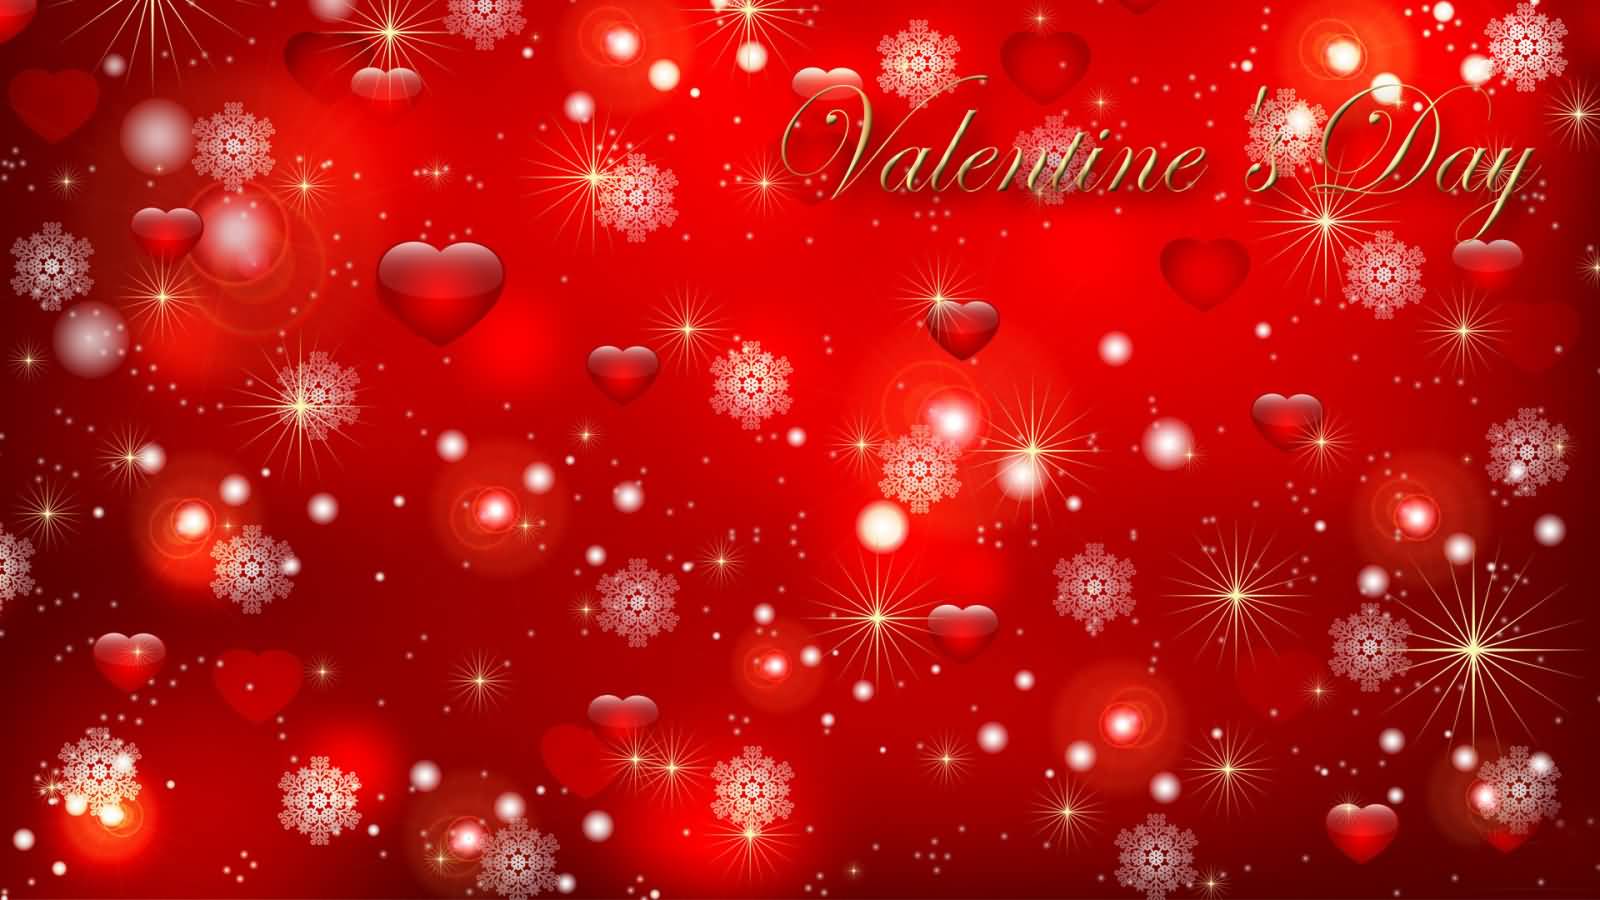 Happy Valentine’s Day Hearts And Snowflakes Wallpaper